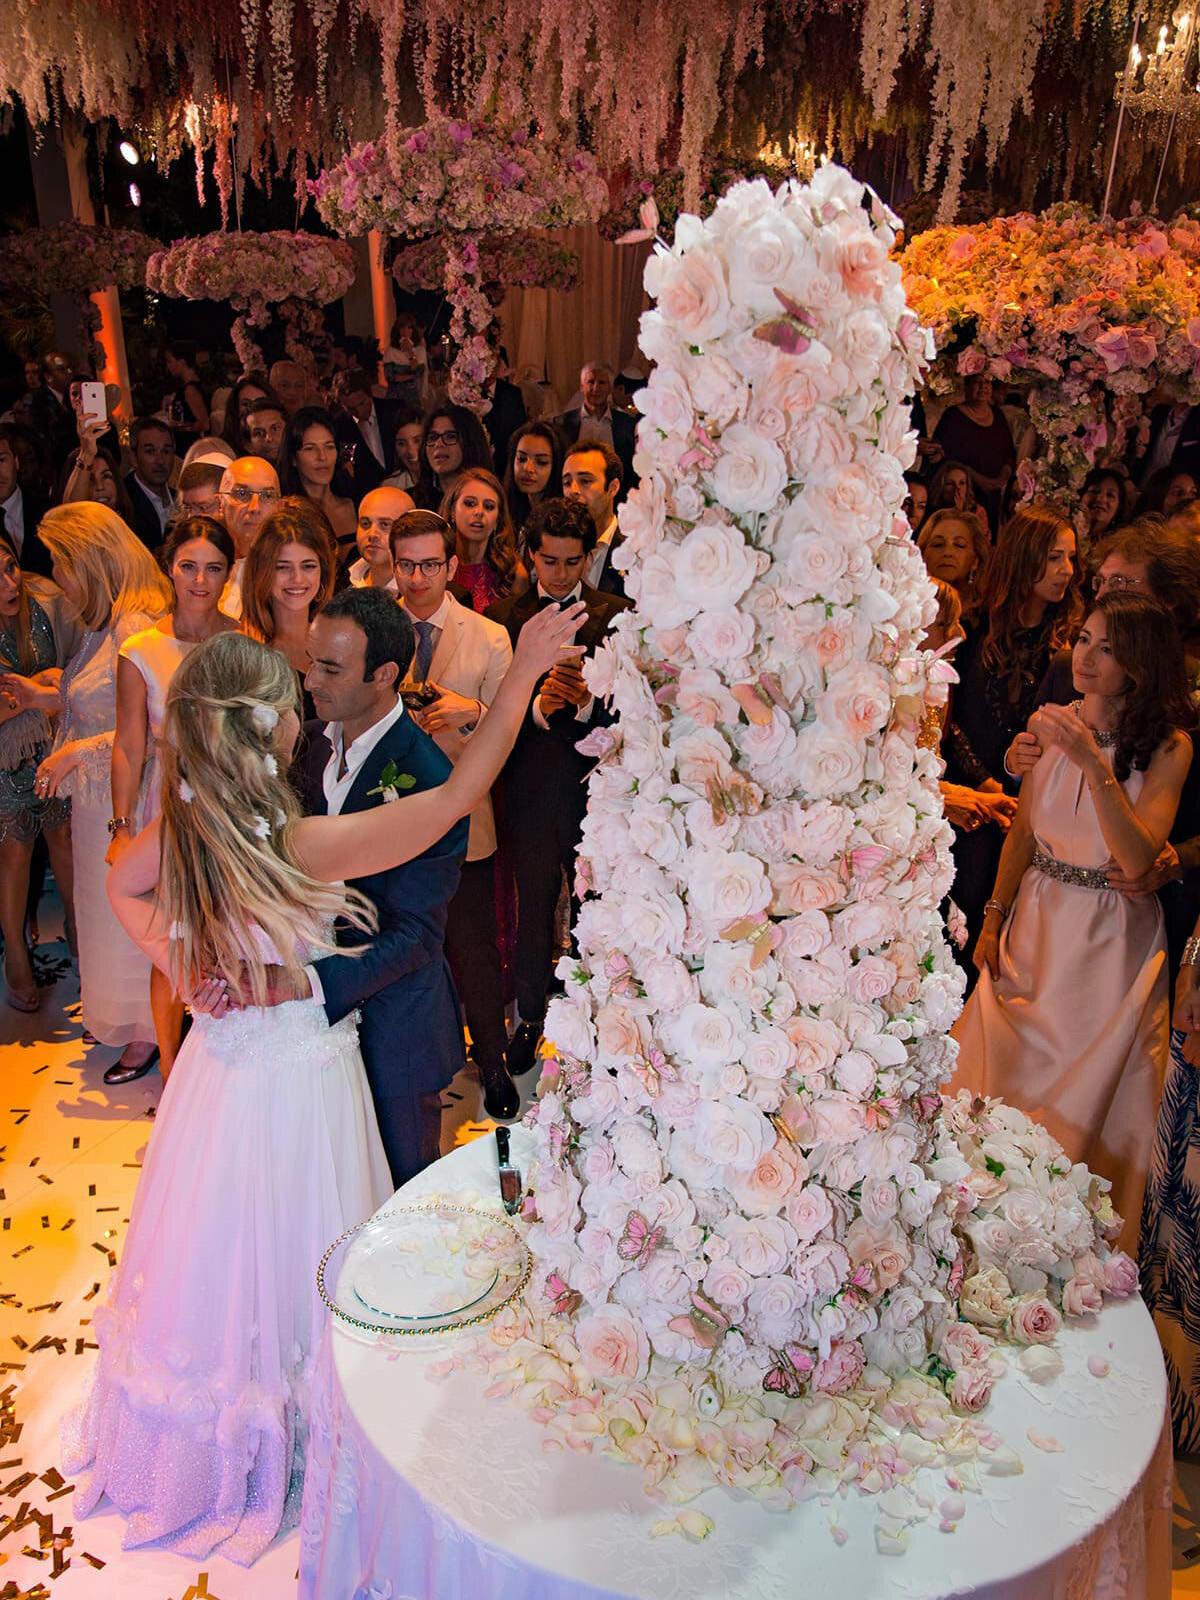 Tall centerpiece of pink and white flowers at wedding